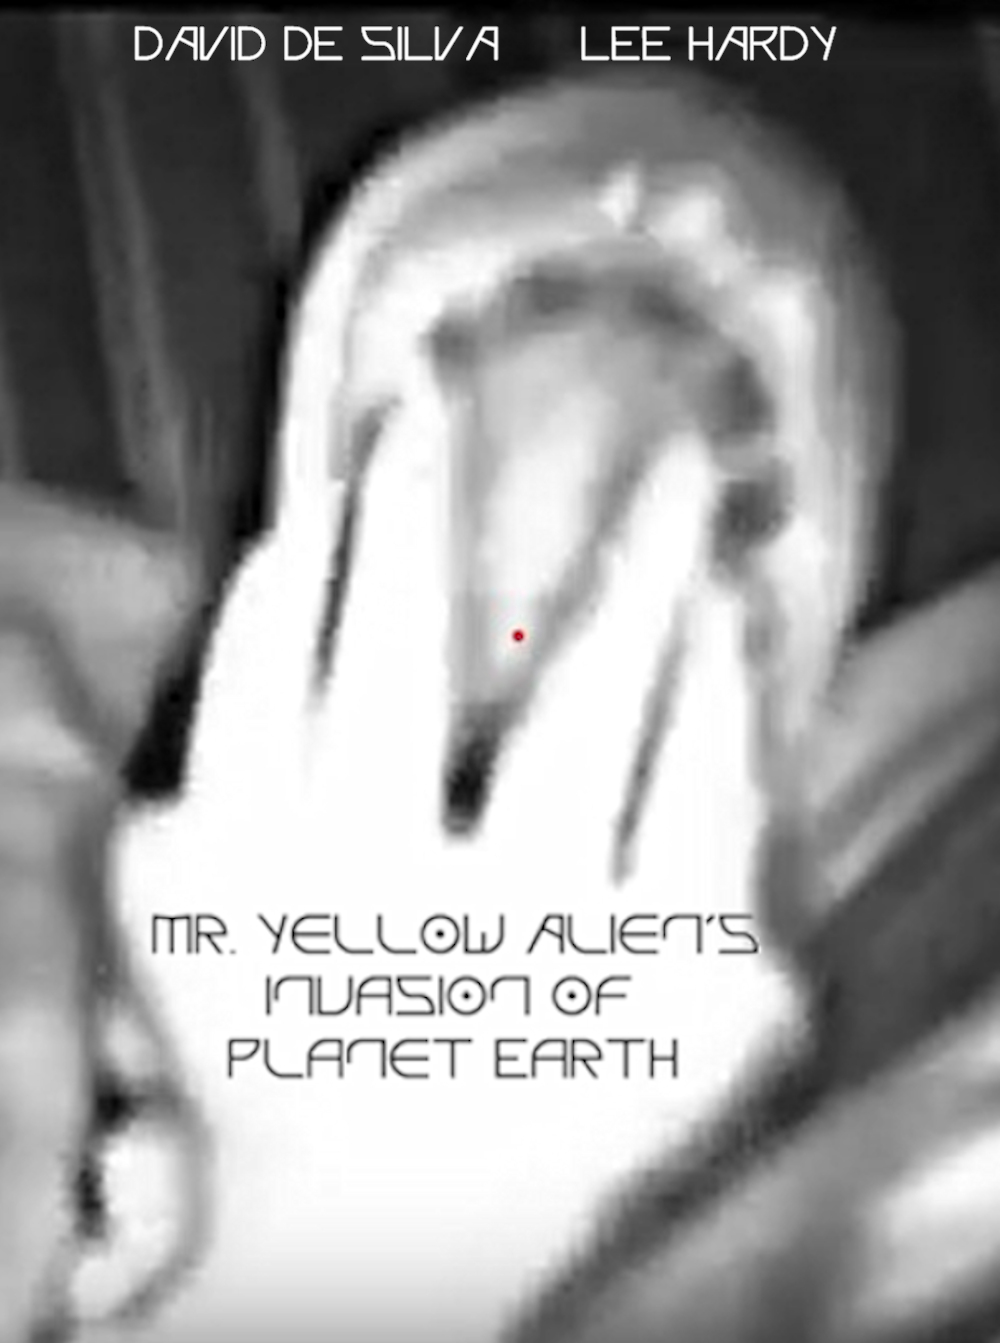 Mr. Yellow Alien's Invasion of Planet Earth